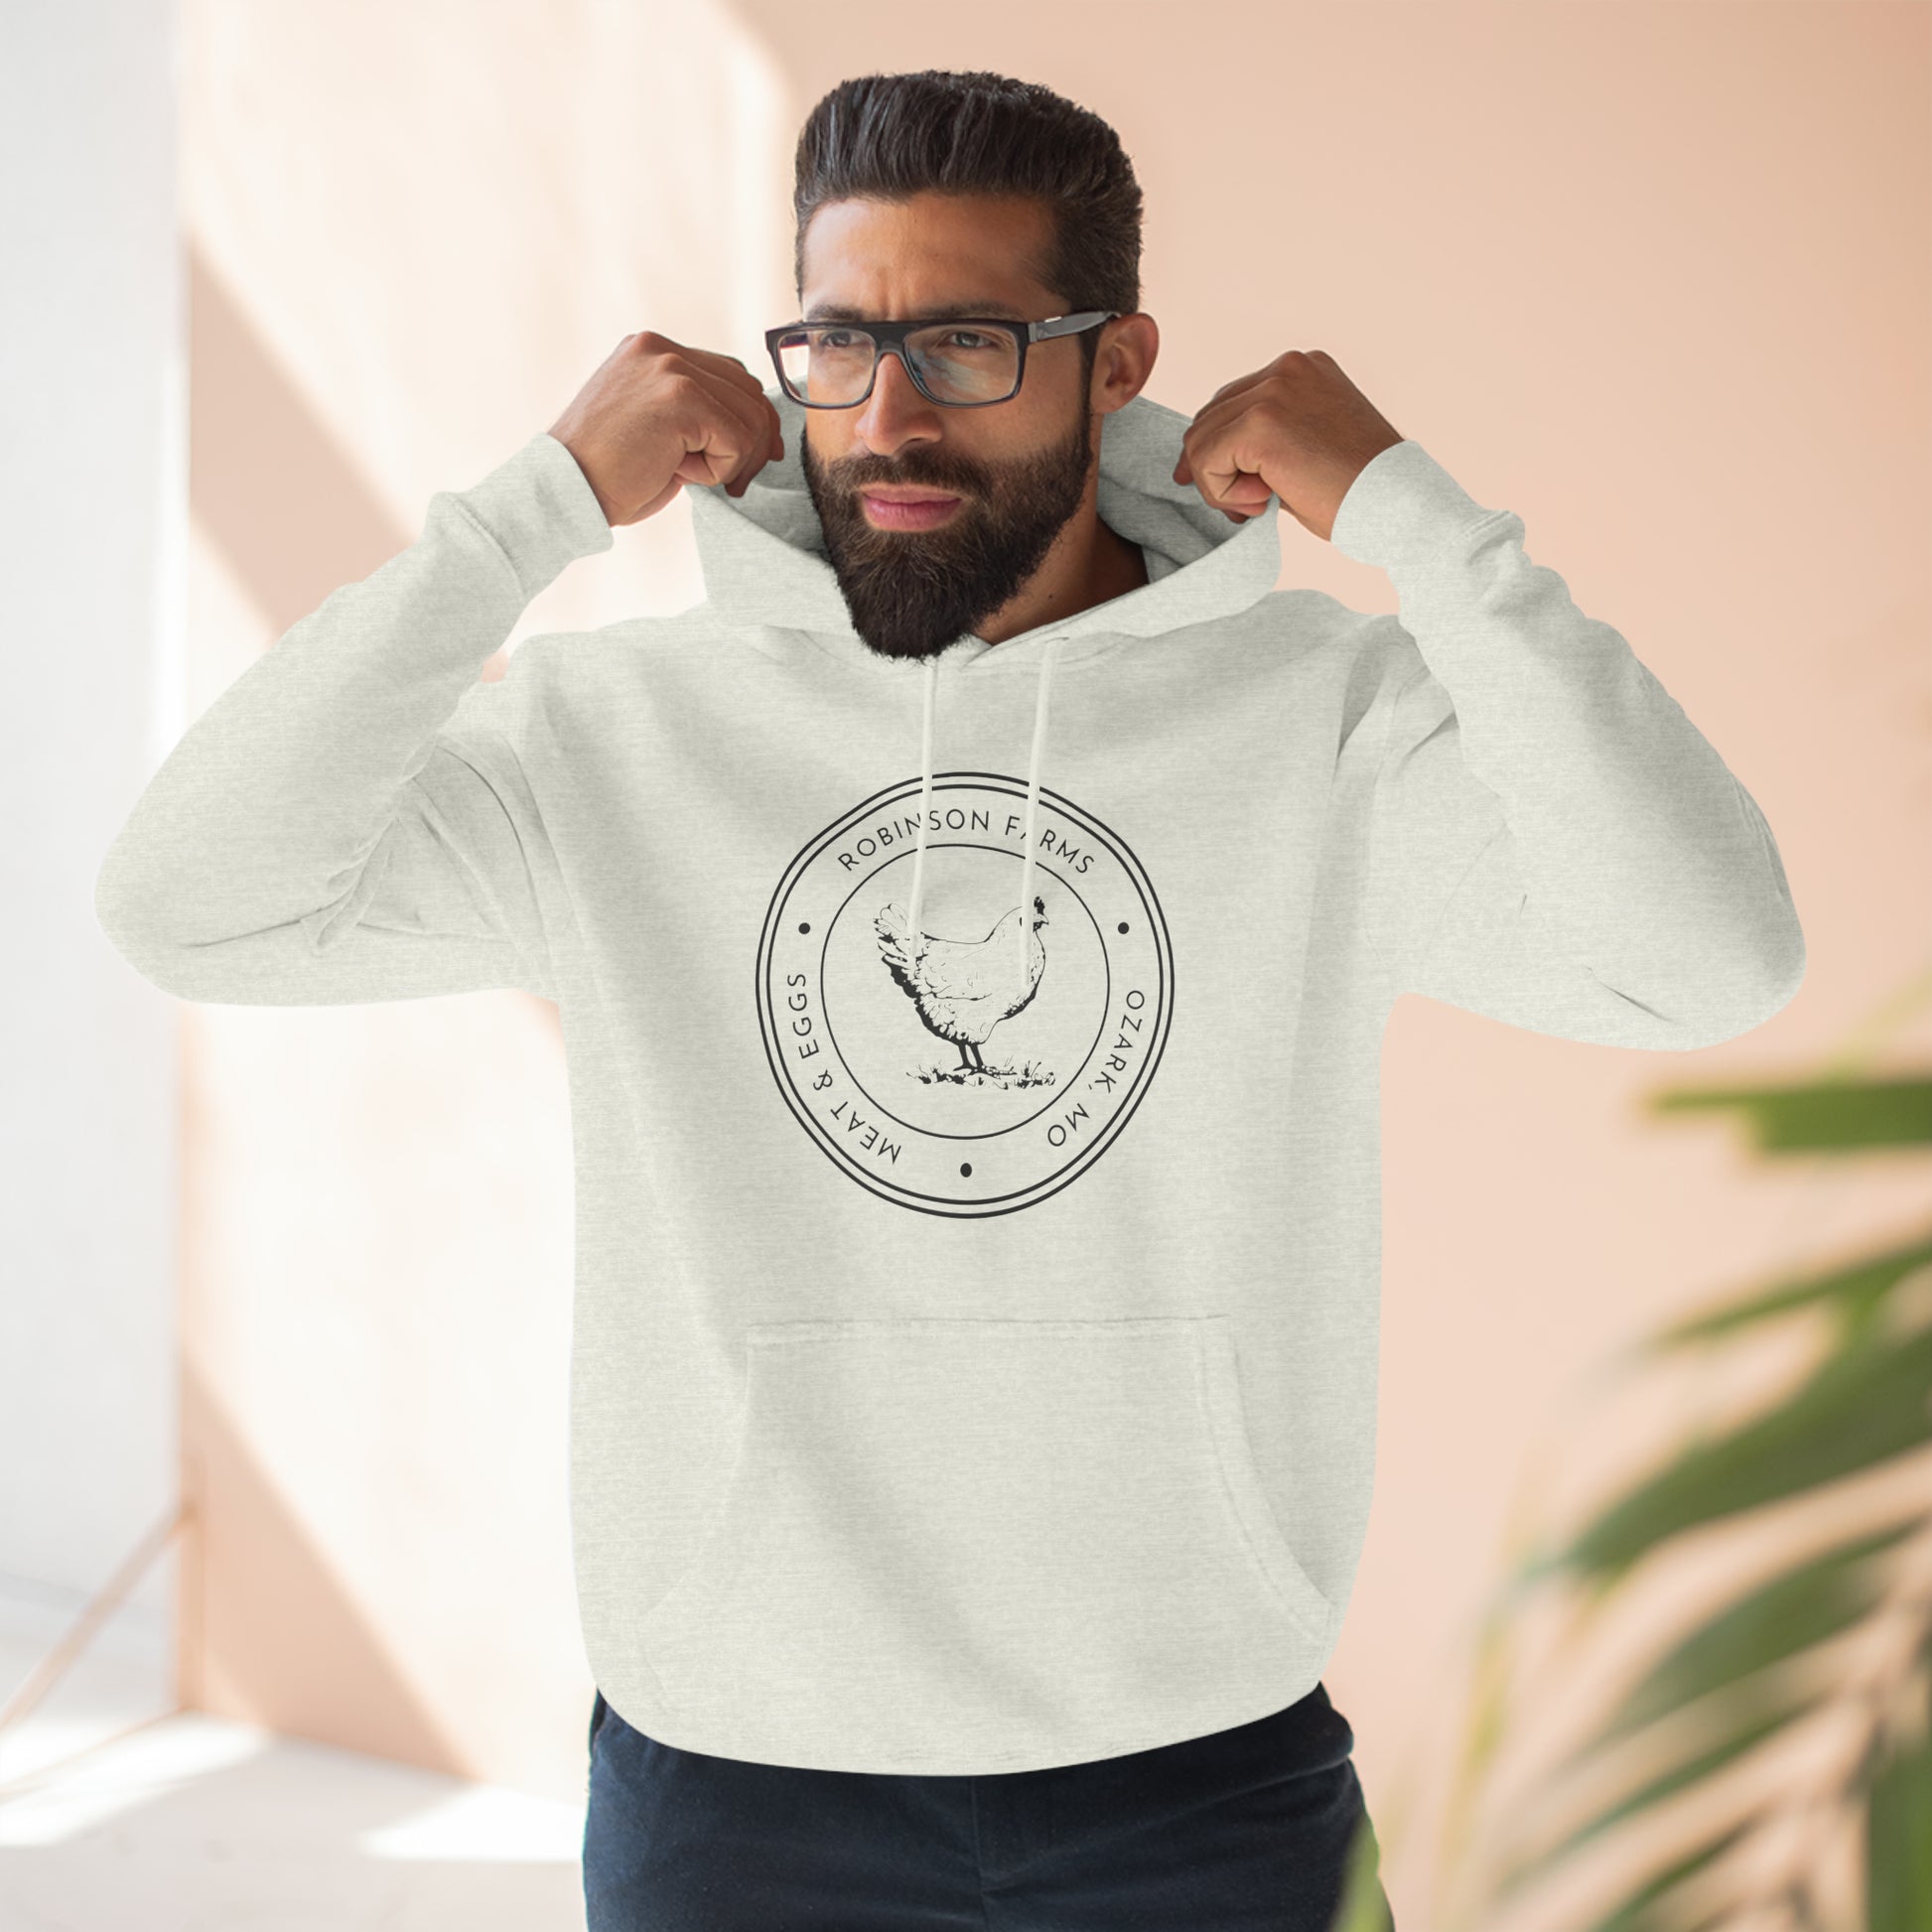 Custom "Chicken Farm Logo" Hoodie - Weave Got Gifts - Unique Gifts You Won’t Find Anywhere Else!